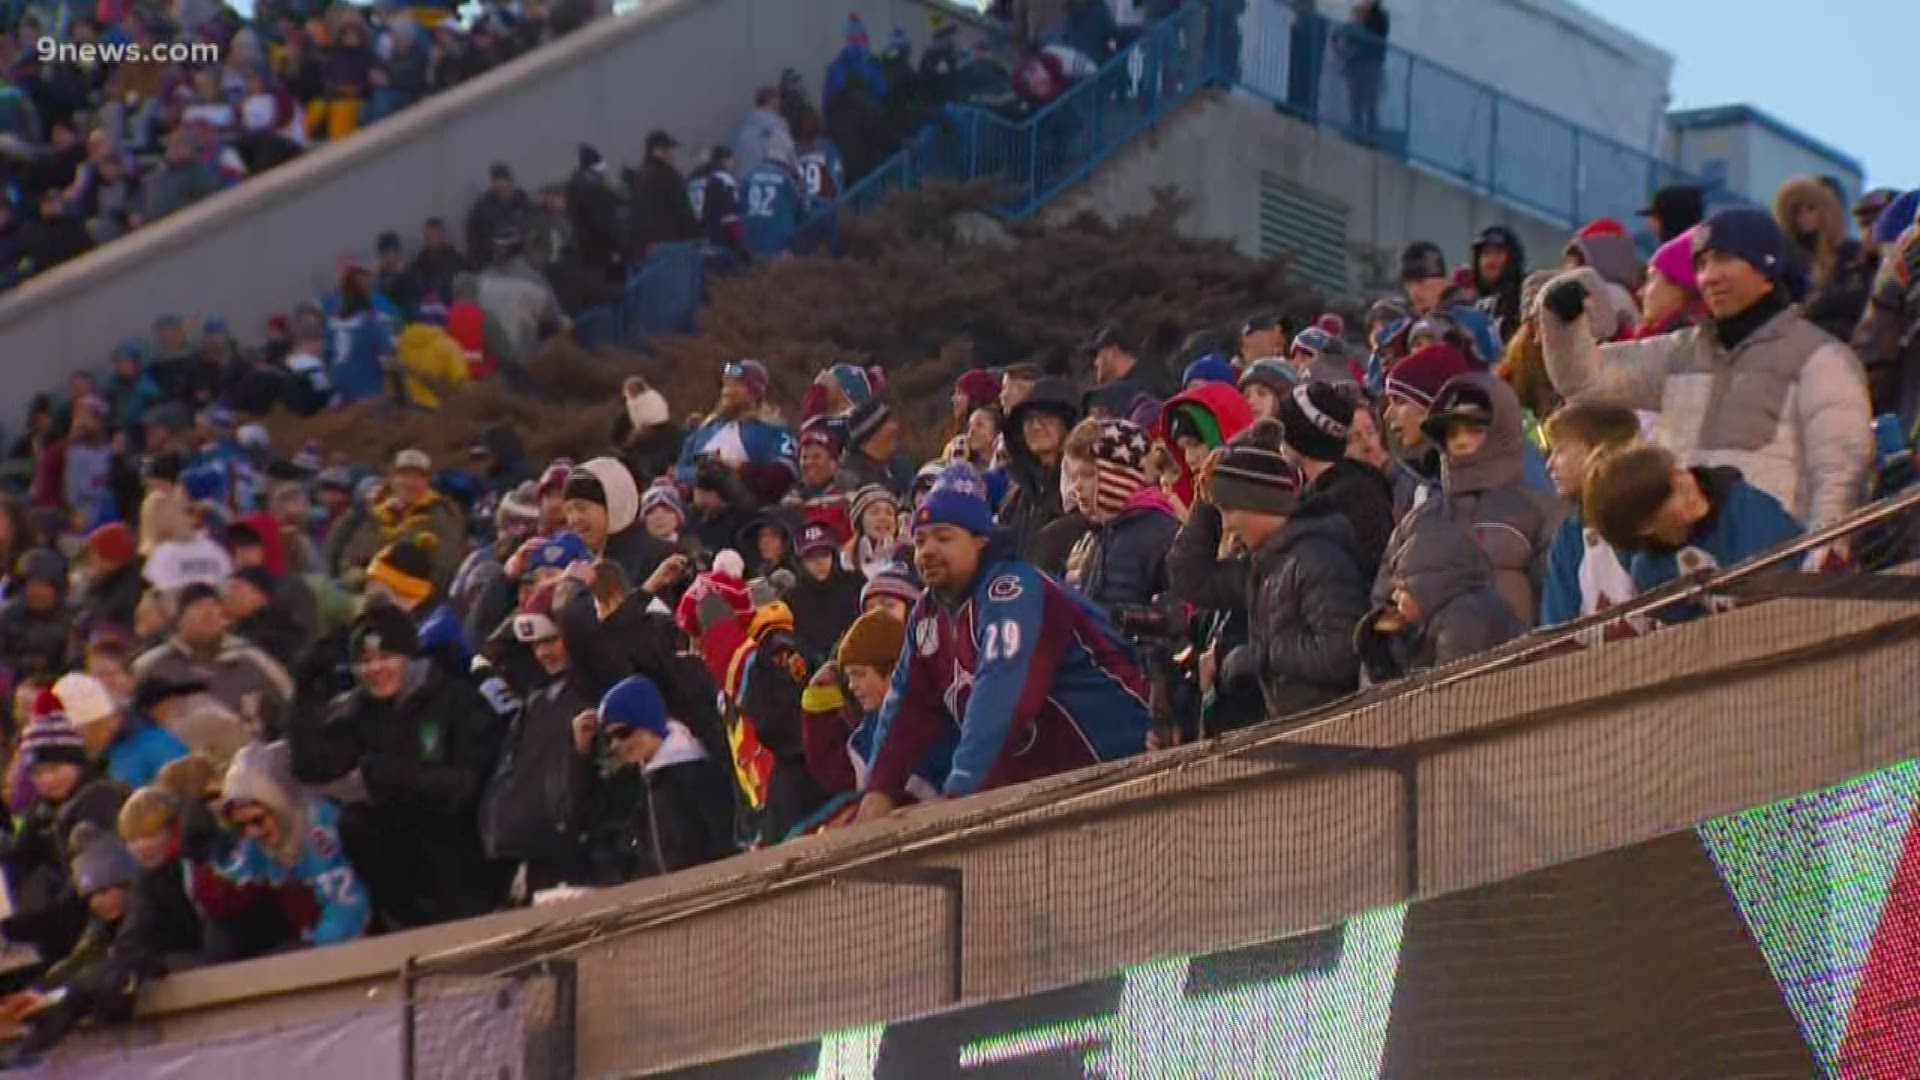 The NHL Stadium Series outdoor hockey game on Saturday between the Colorado Avalanche and Los Angeles Kings had some hiccups.